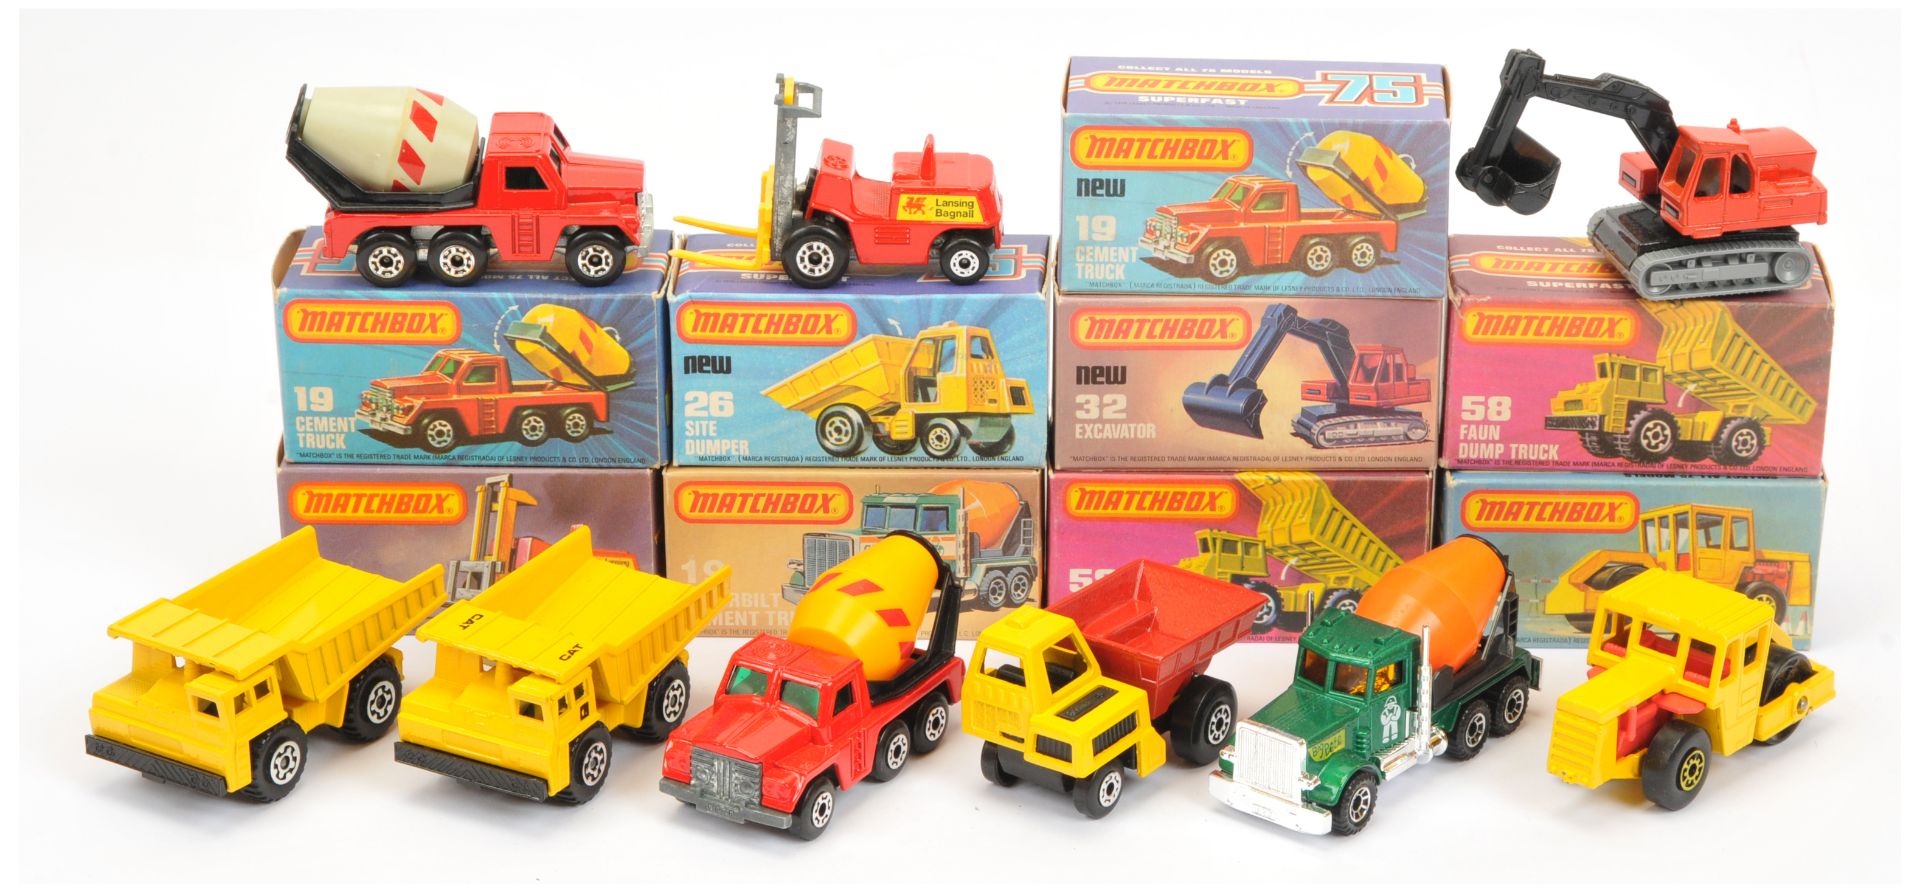 Matchbox Superfast A Group of 9 Construction Related To Include 15b Fork lift Truck - red and yel...